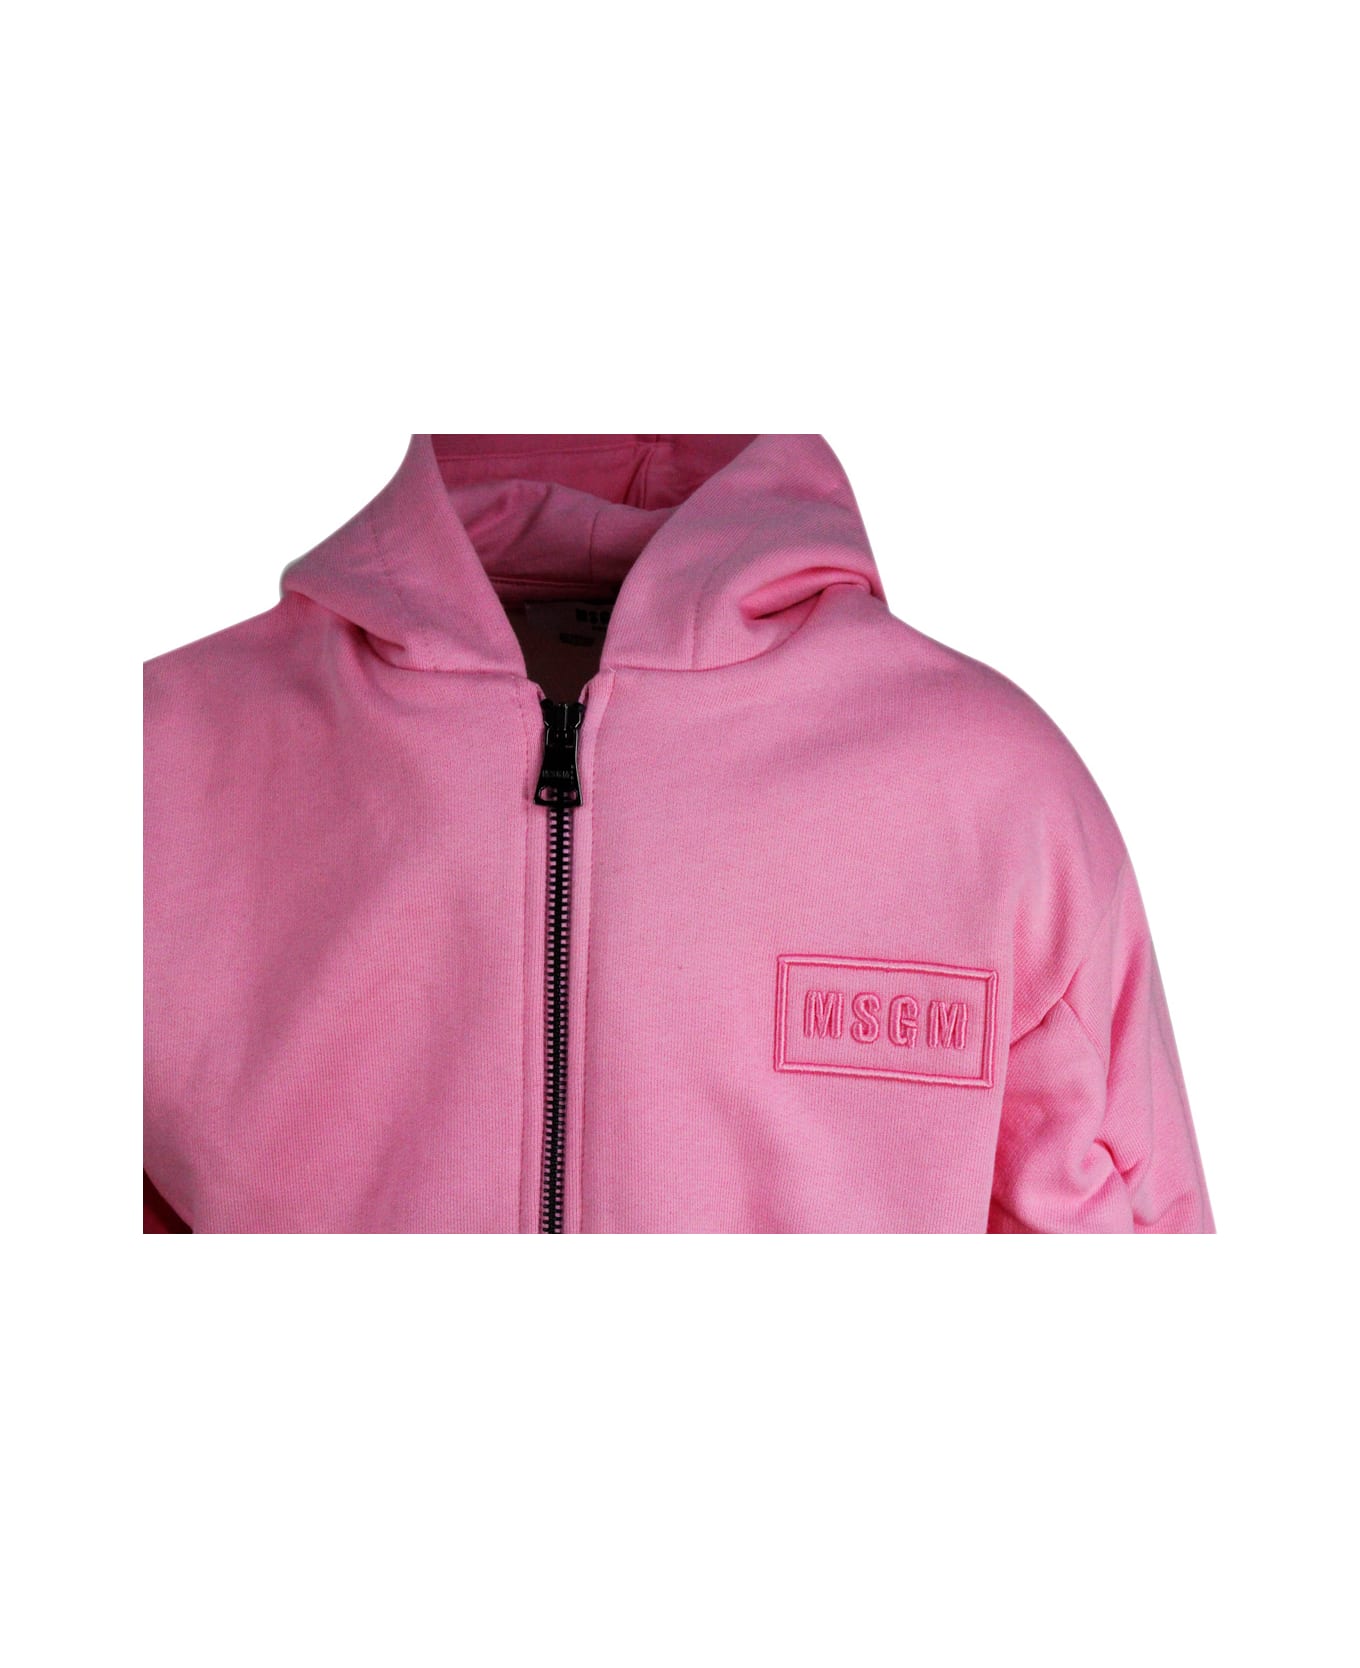 MSGM Cotton Sweatshirt With Hood With Side Pockets, Zip Closure And Writing - Pink